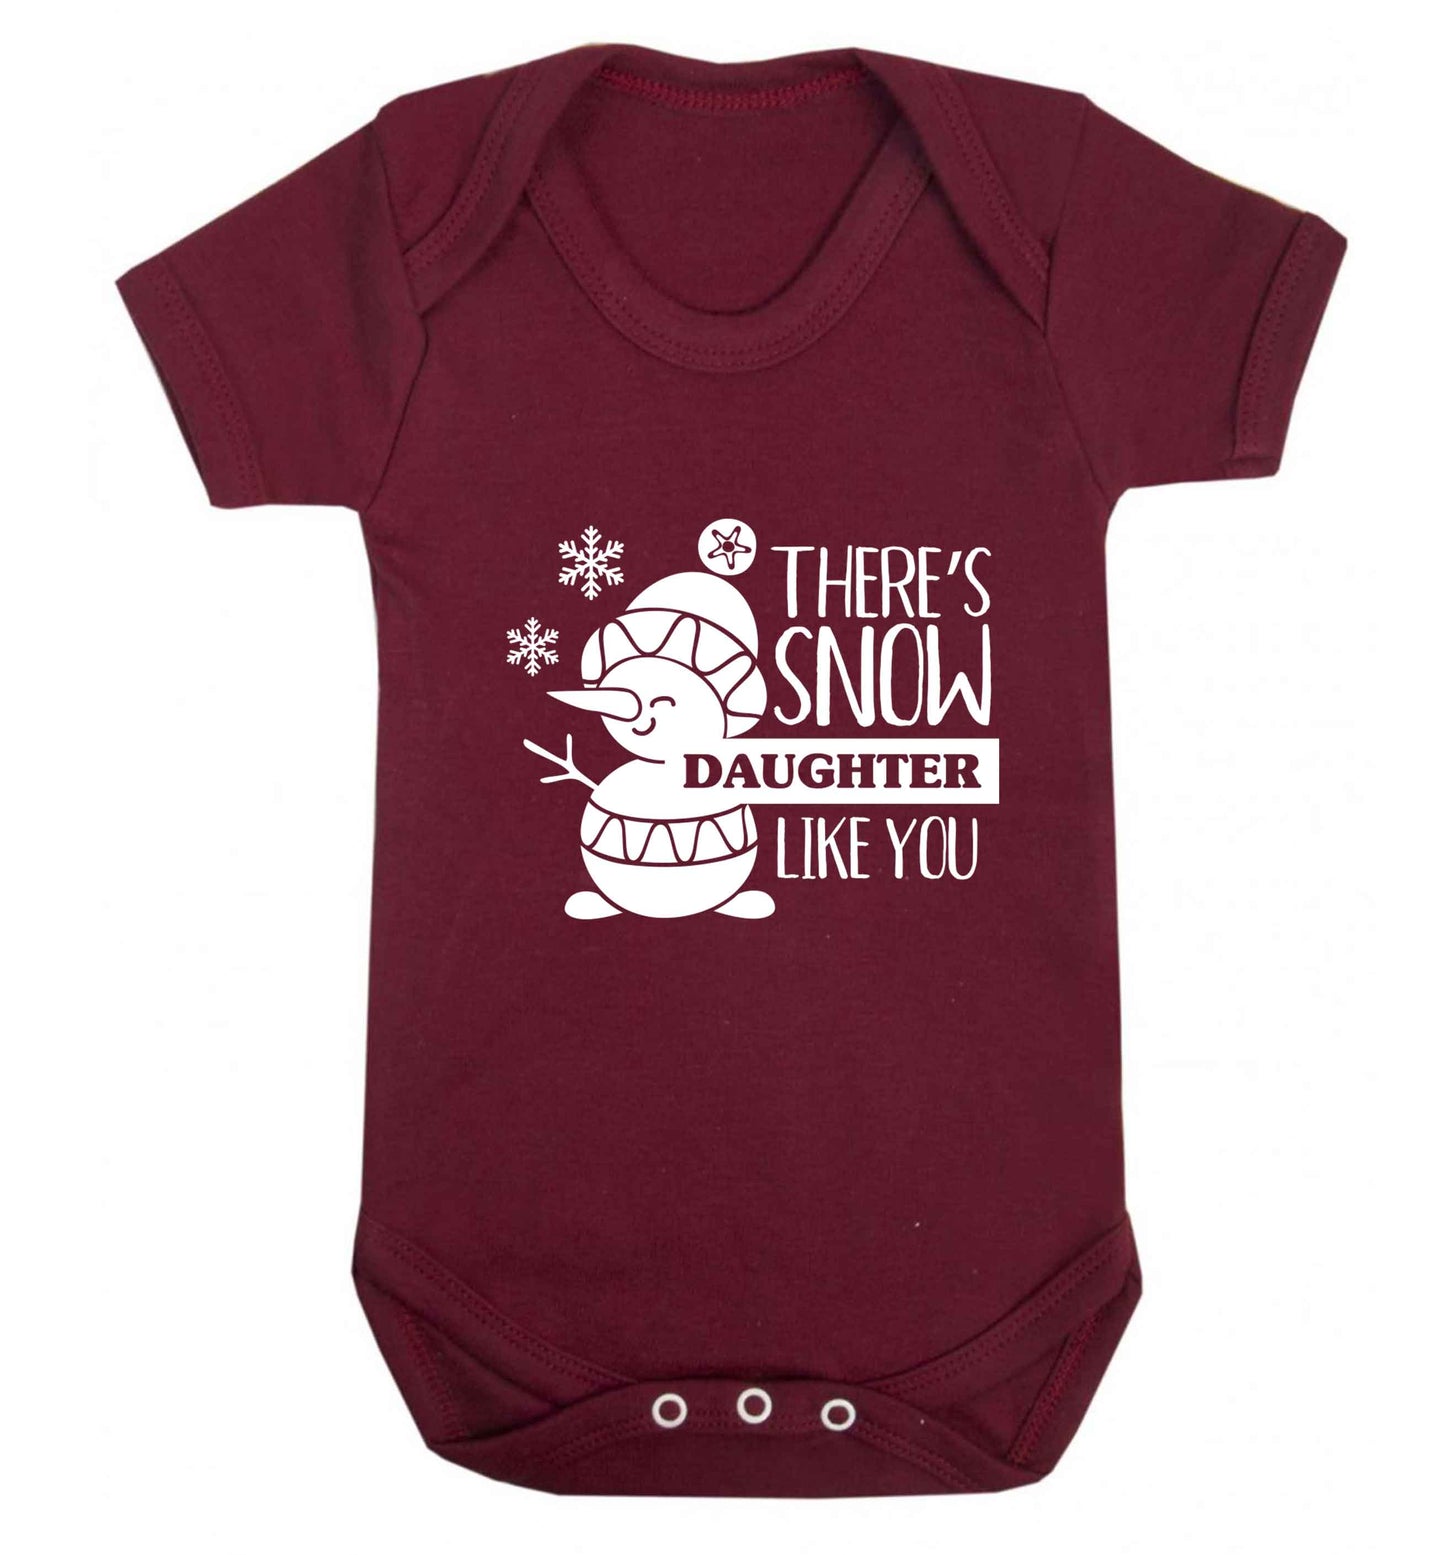 There's snow daughter like you baby vest maroon 18-24 months